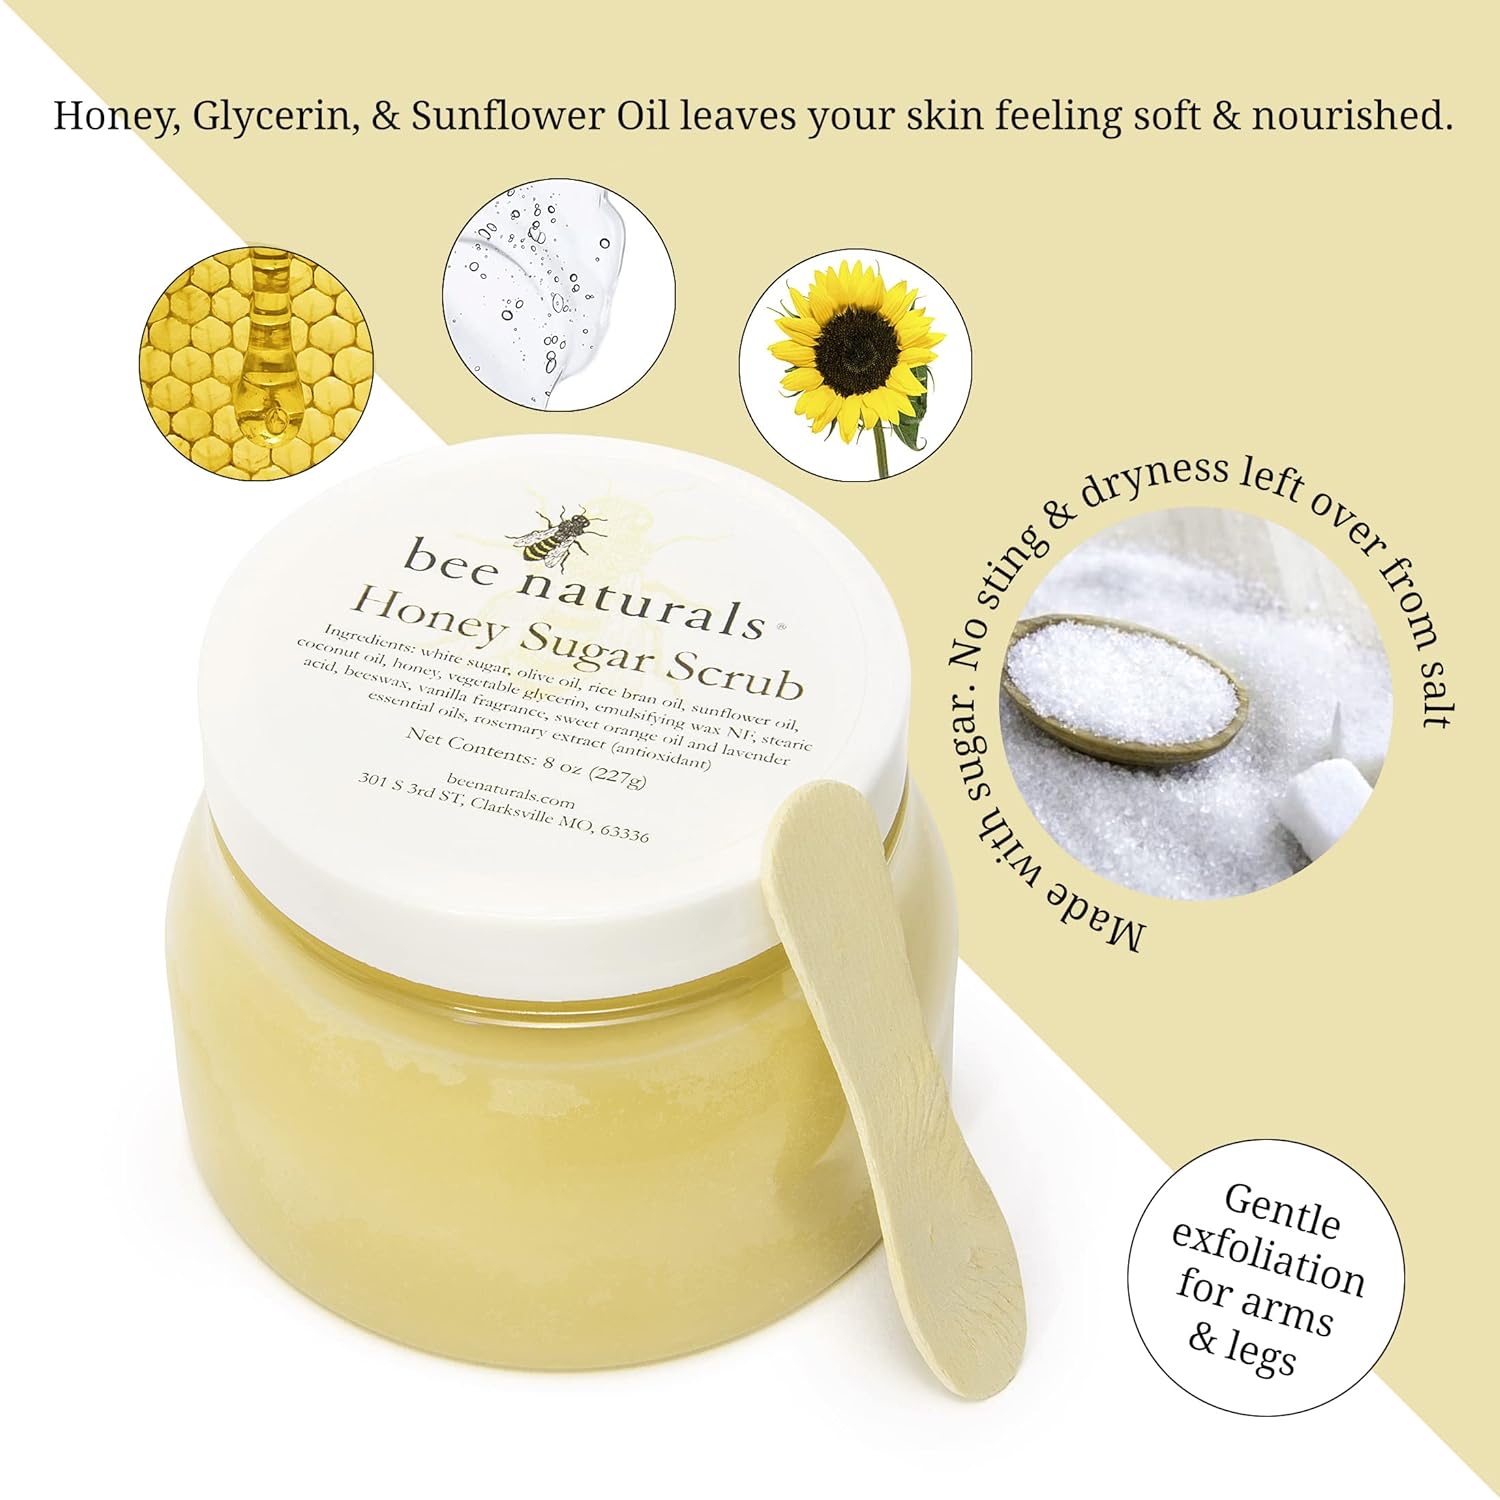 Luxurious Honey Sugar Scrub 8oz - Luminous Radiance - Gentle Exfoliating Blend for Face, Body & Feet with Coconut, Beeswax & Essential Oils -Signature Vanilla Fragrance- Nourishing, Moisturizing : Body Scrubs : Beauty & Personal Care